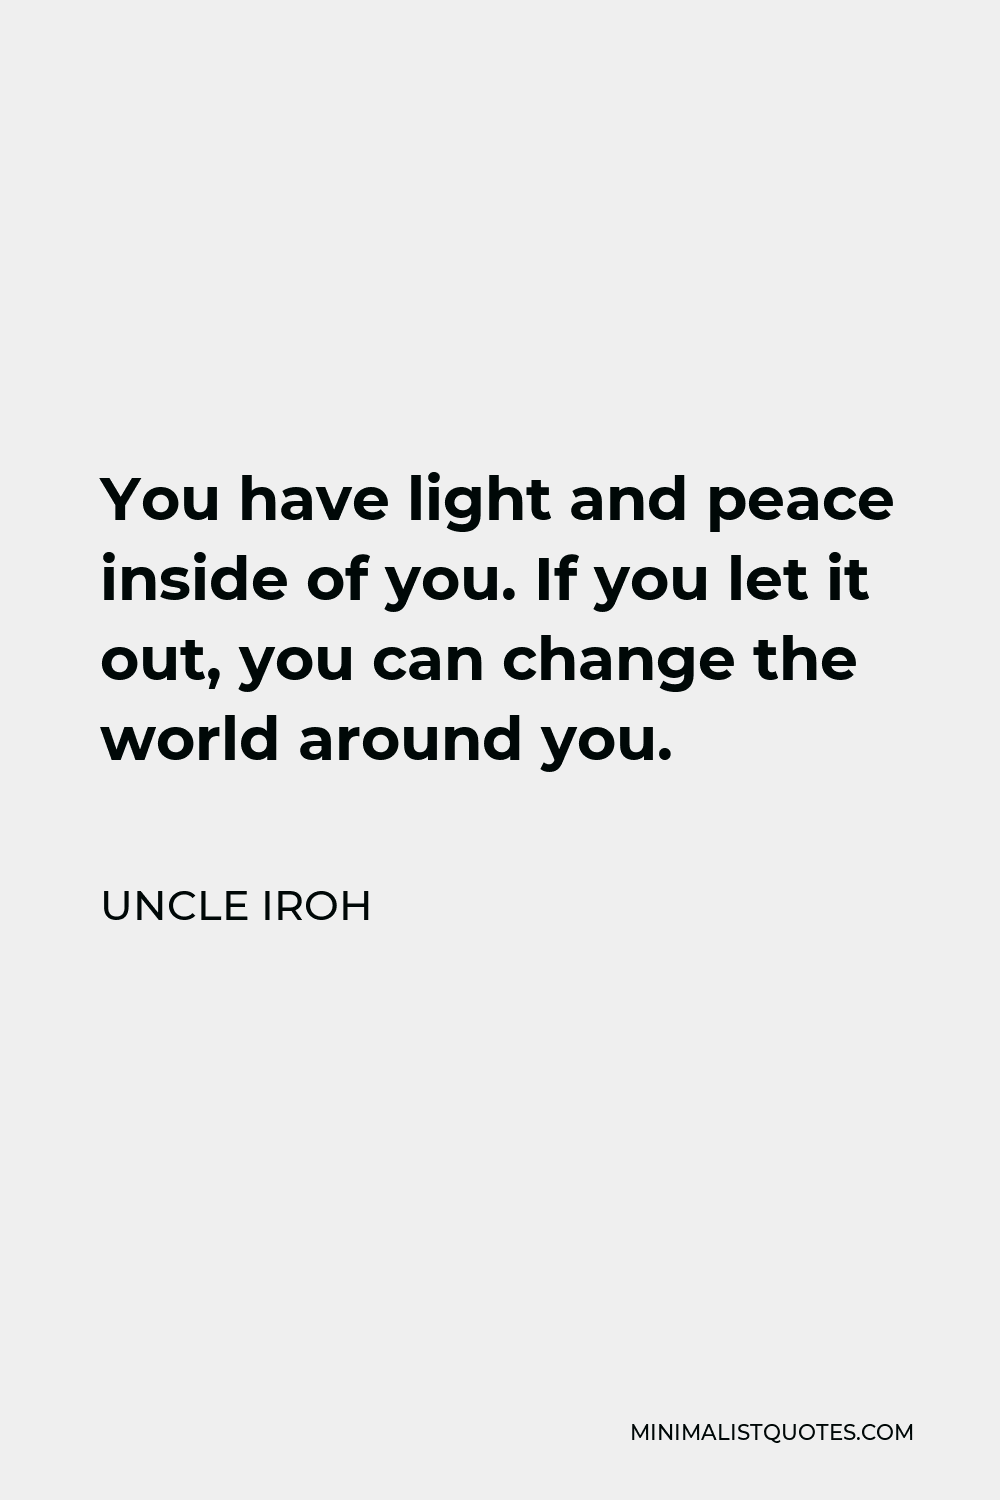 Uncle Iroh Quote: You have light and peace inside of you. If you let it ...